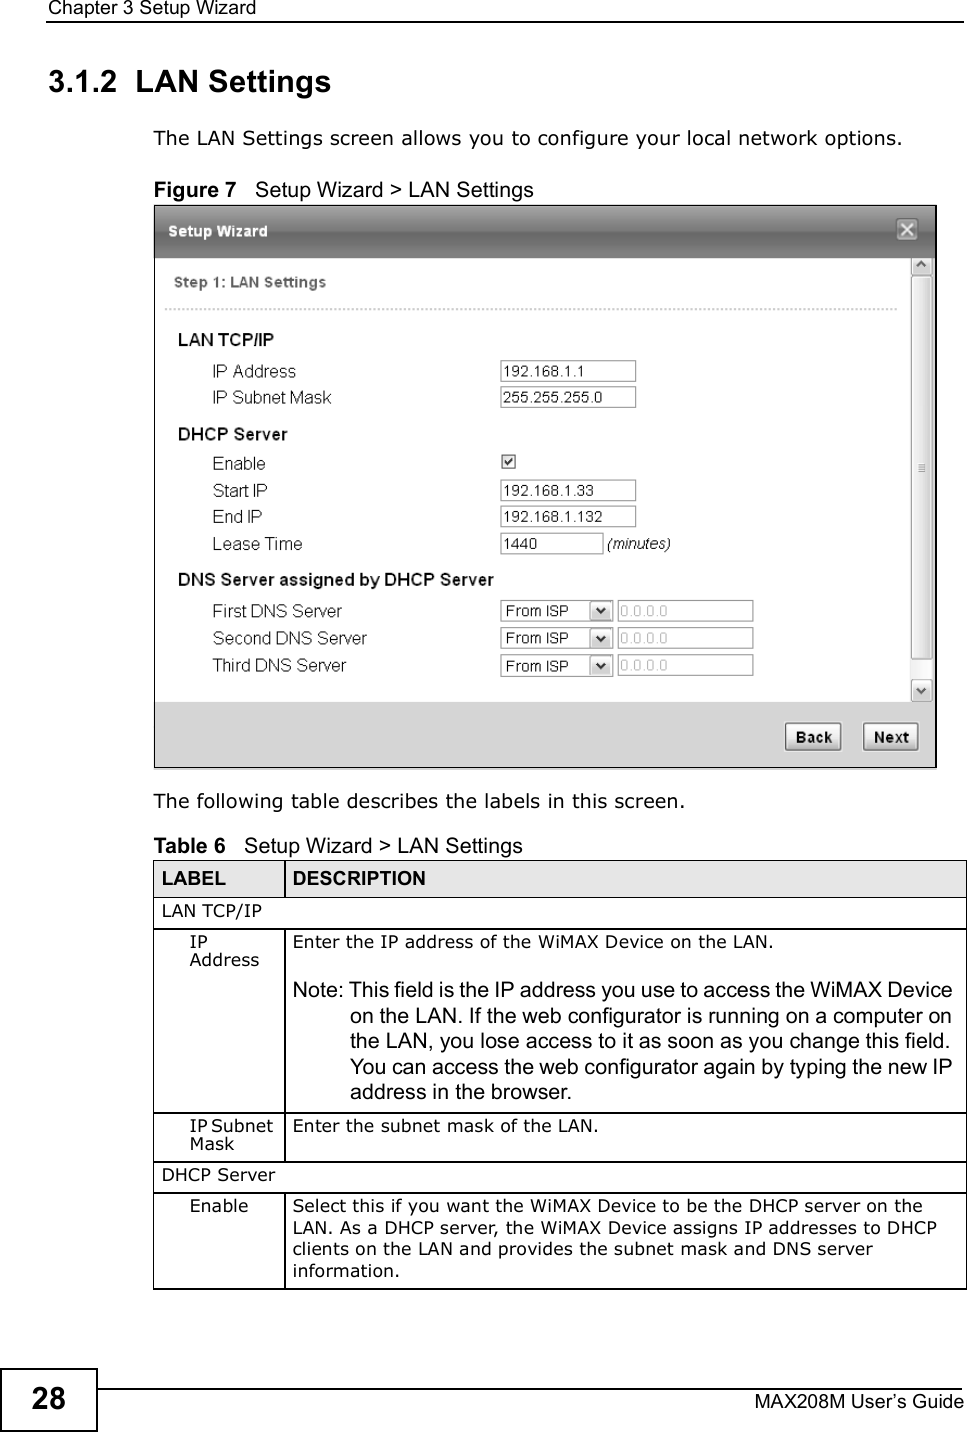 Chapter 3Setup WizardMAX208M User s Guide283.1.2  LAN SettingsThe LAN Settings screen allows you to configure your local network options.Figure 7   Setup Wizard &gt; LAN SettingsThe following table describes the labels in this screen.Table 6   Setup Wizard &gt; LAN SettingsLABEL DESCRIPTIONLAN TCP/IPIP AddressEnter the IP address of the WiMAX Device on the LAN.Note: This field is the IP address you use to access the WiMAX Device on the LAN. If the web configurator is running on a computer on the LAN, you lose access to it as soon as you change this field. You can access the web configurator again by typing the new IP address in the browser.IP Subnet MaskEnter the subnet mask of the LAN.DHCP ServerEnable Select this if you want the WiMAX Device to be the DHCP server on the LAN. As a DHCP server, the WiMAX Device assigns IP addresses to DHCP clients on the LAN and provides the subnet mask and DNS server information.